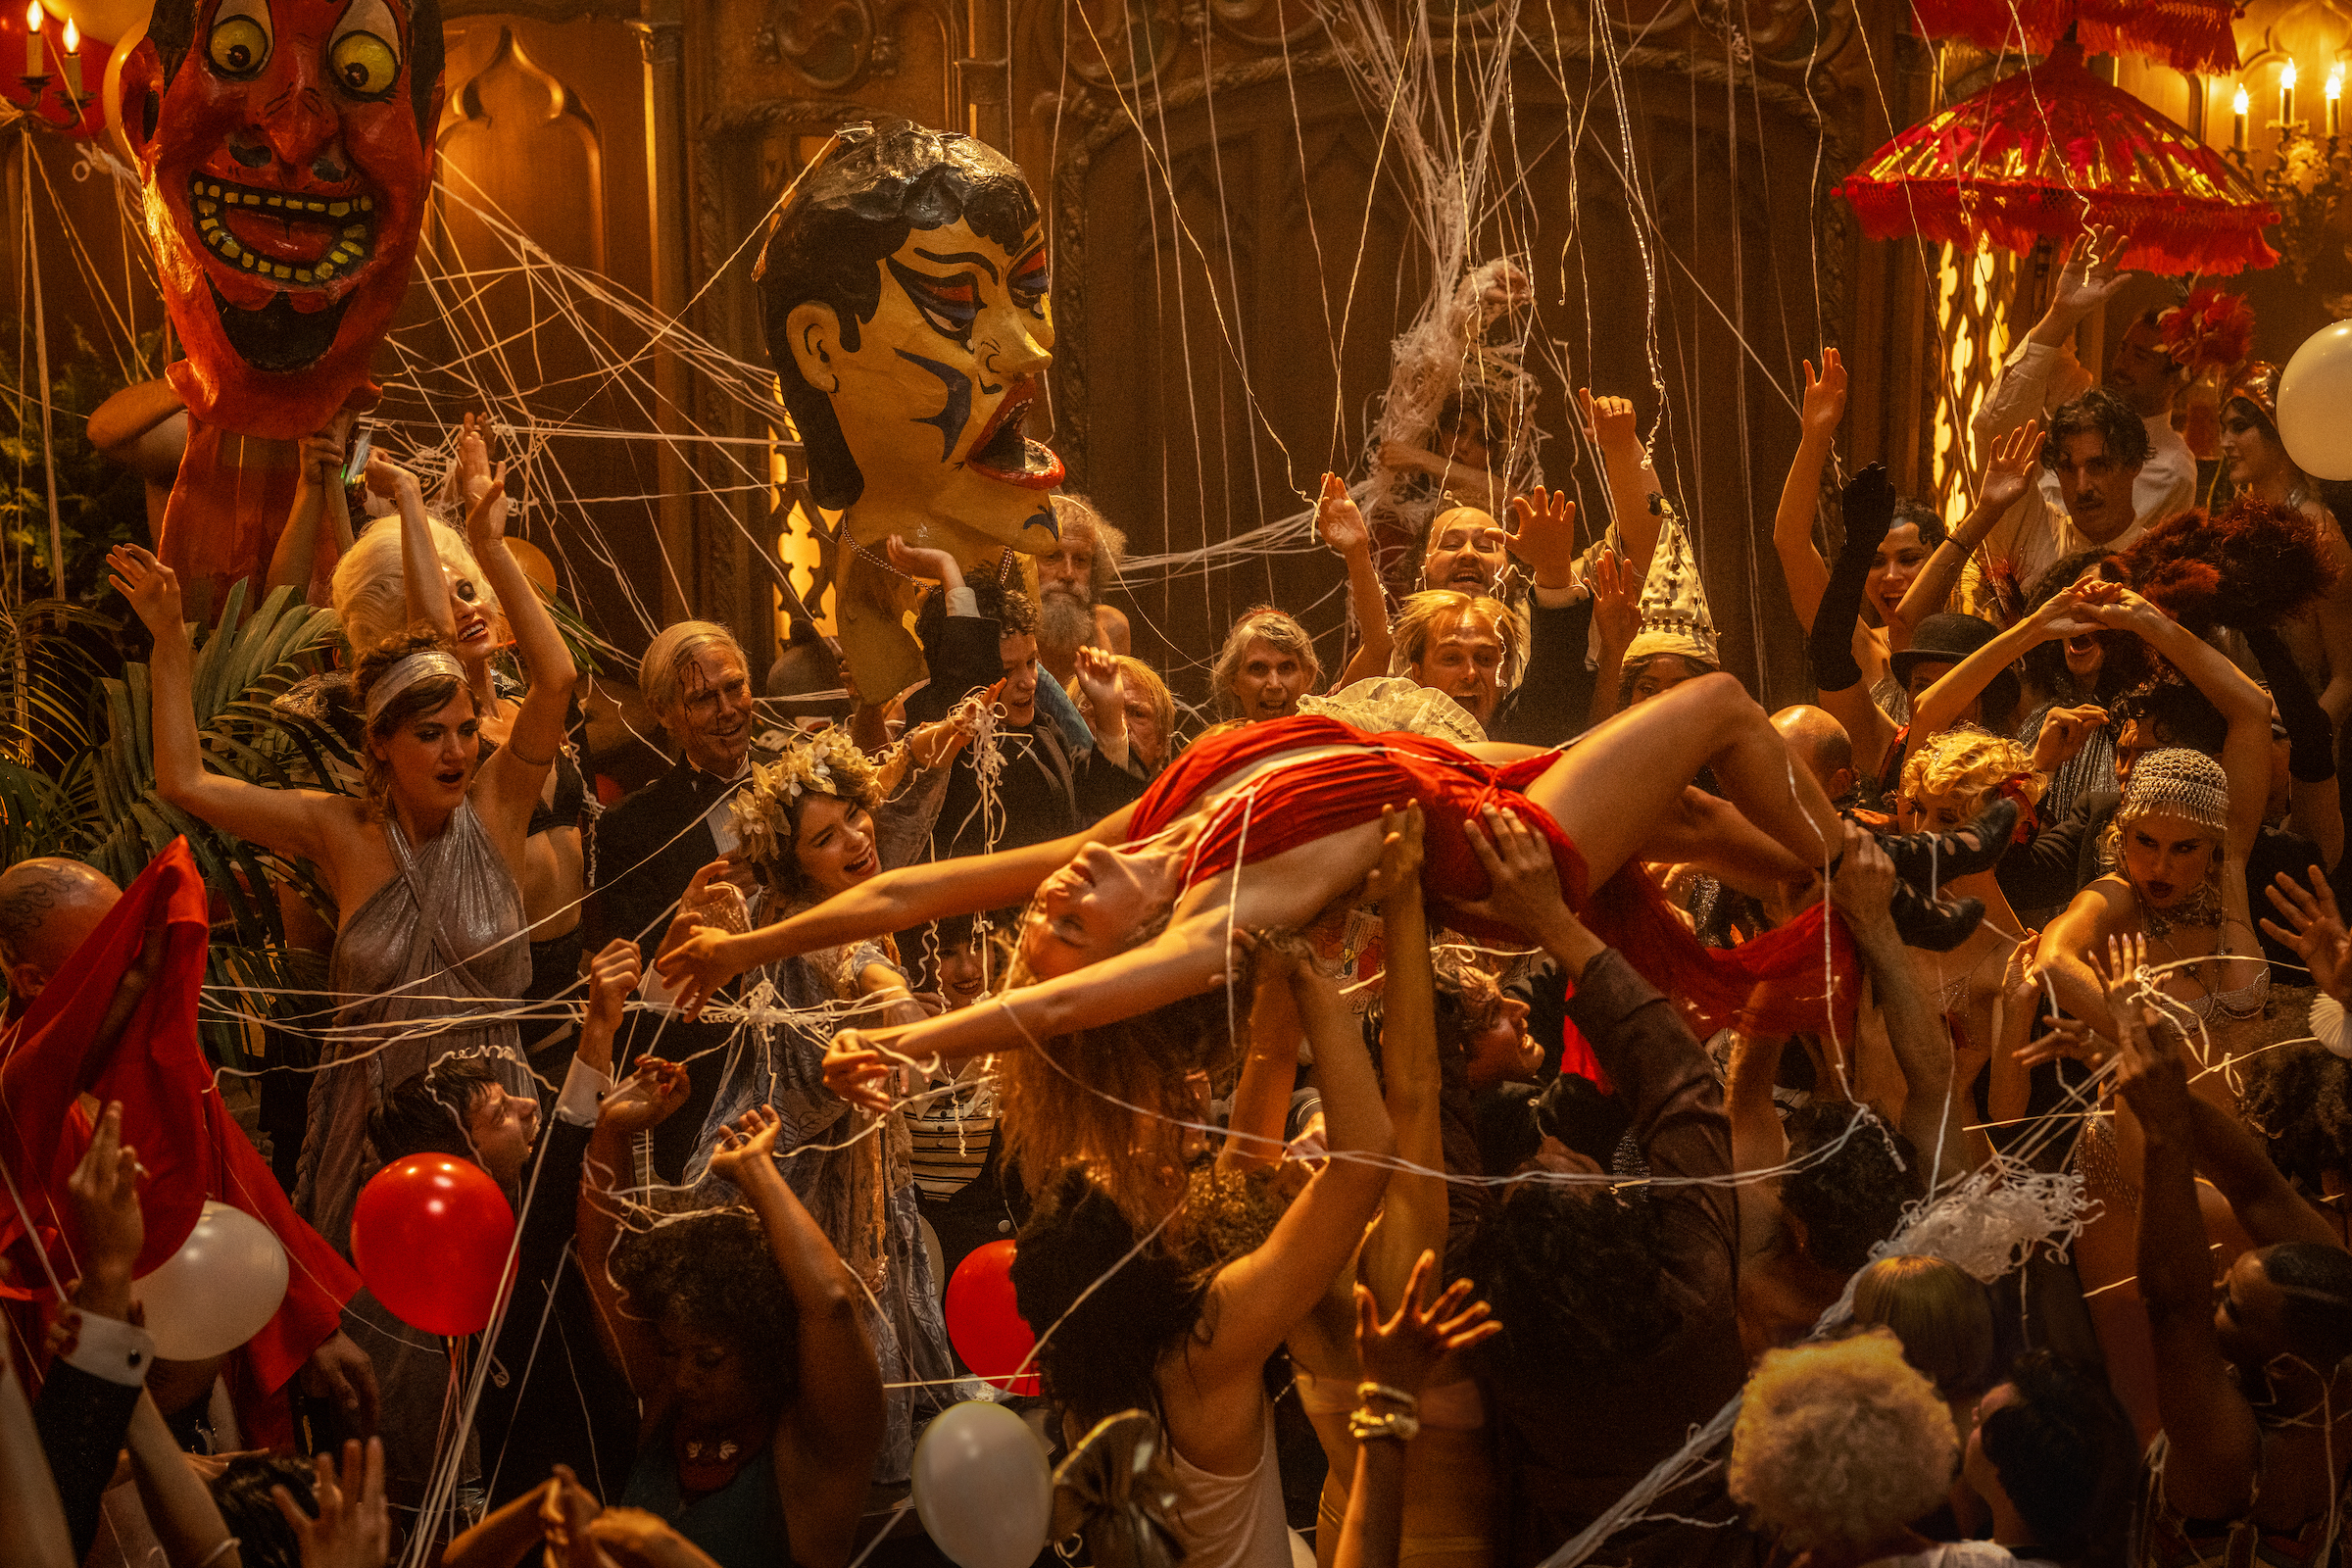 Margot Robbie as Nellie LeRoy at the center of a very, very debaucherous party (Courtesy of Paramount Pictures)